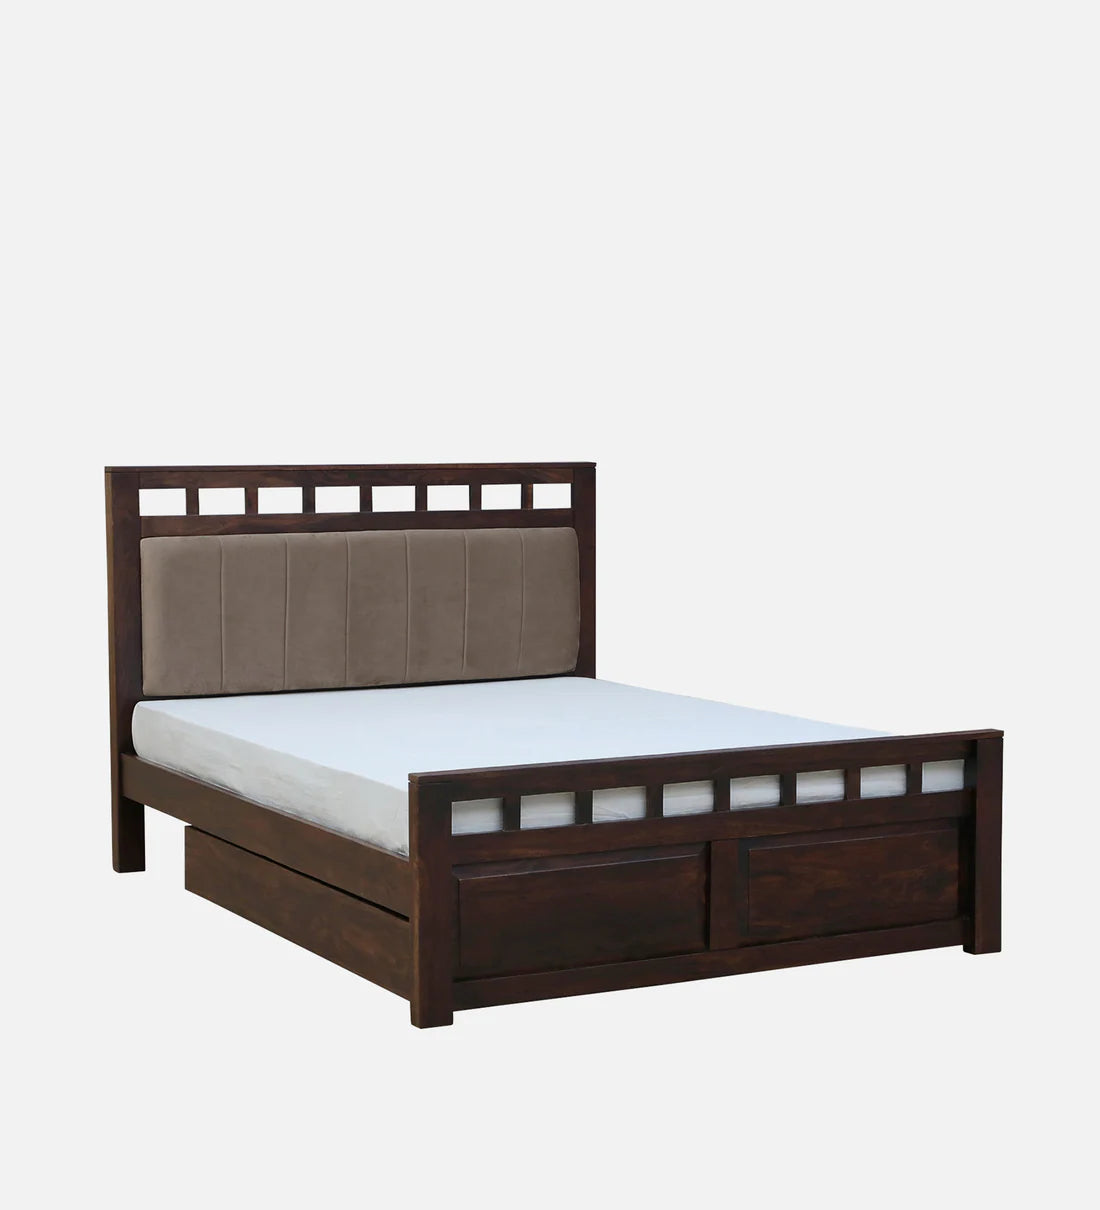 Sheesham Wood King Size Bed In Scratch Resistant Provincial Teak Finish With Drawer Storage